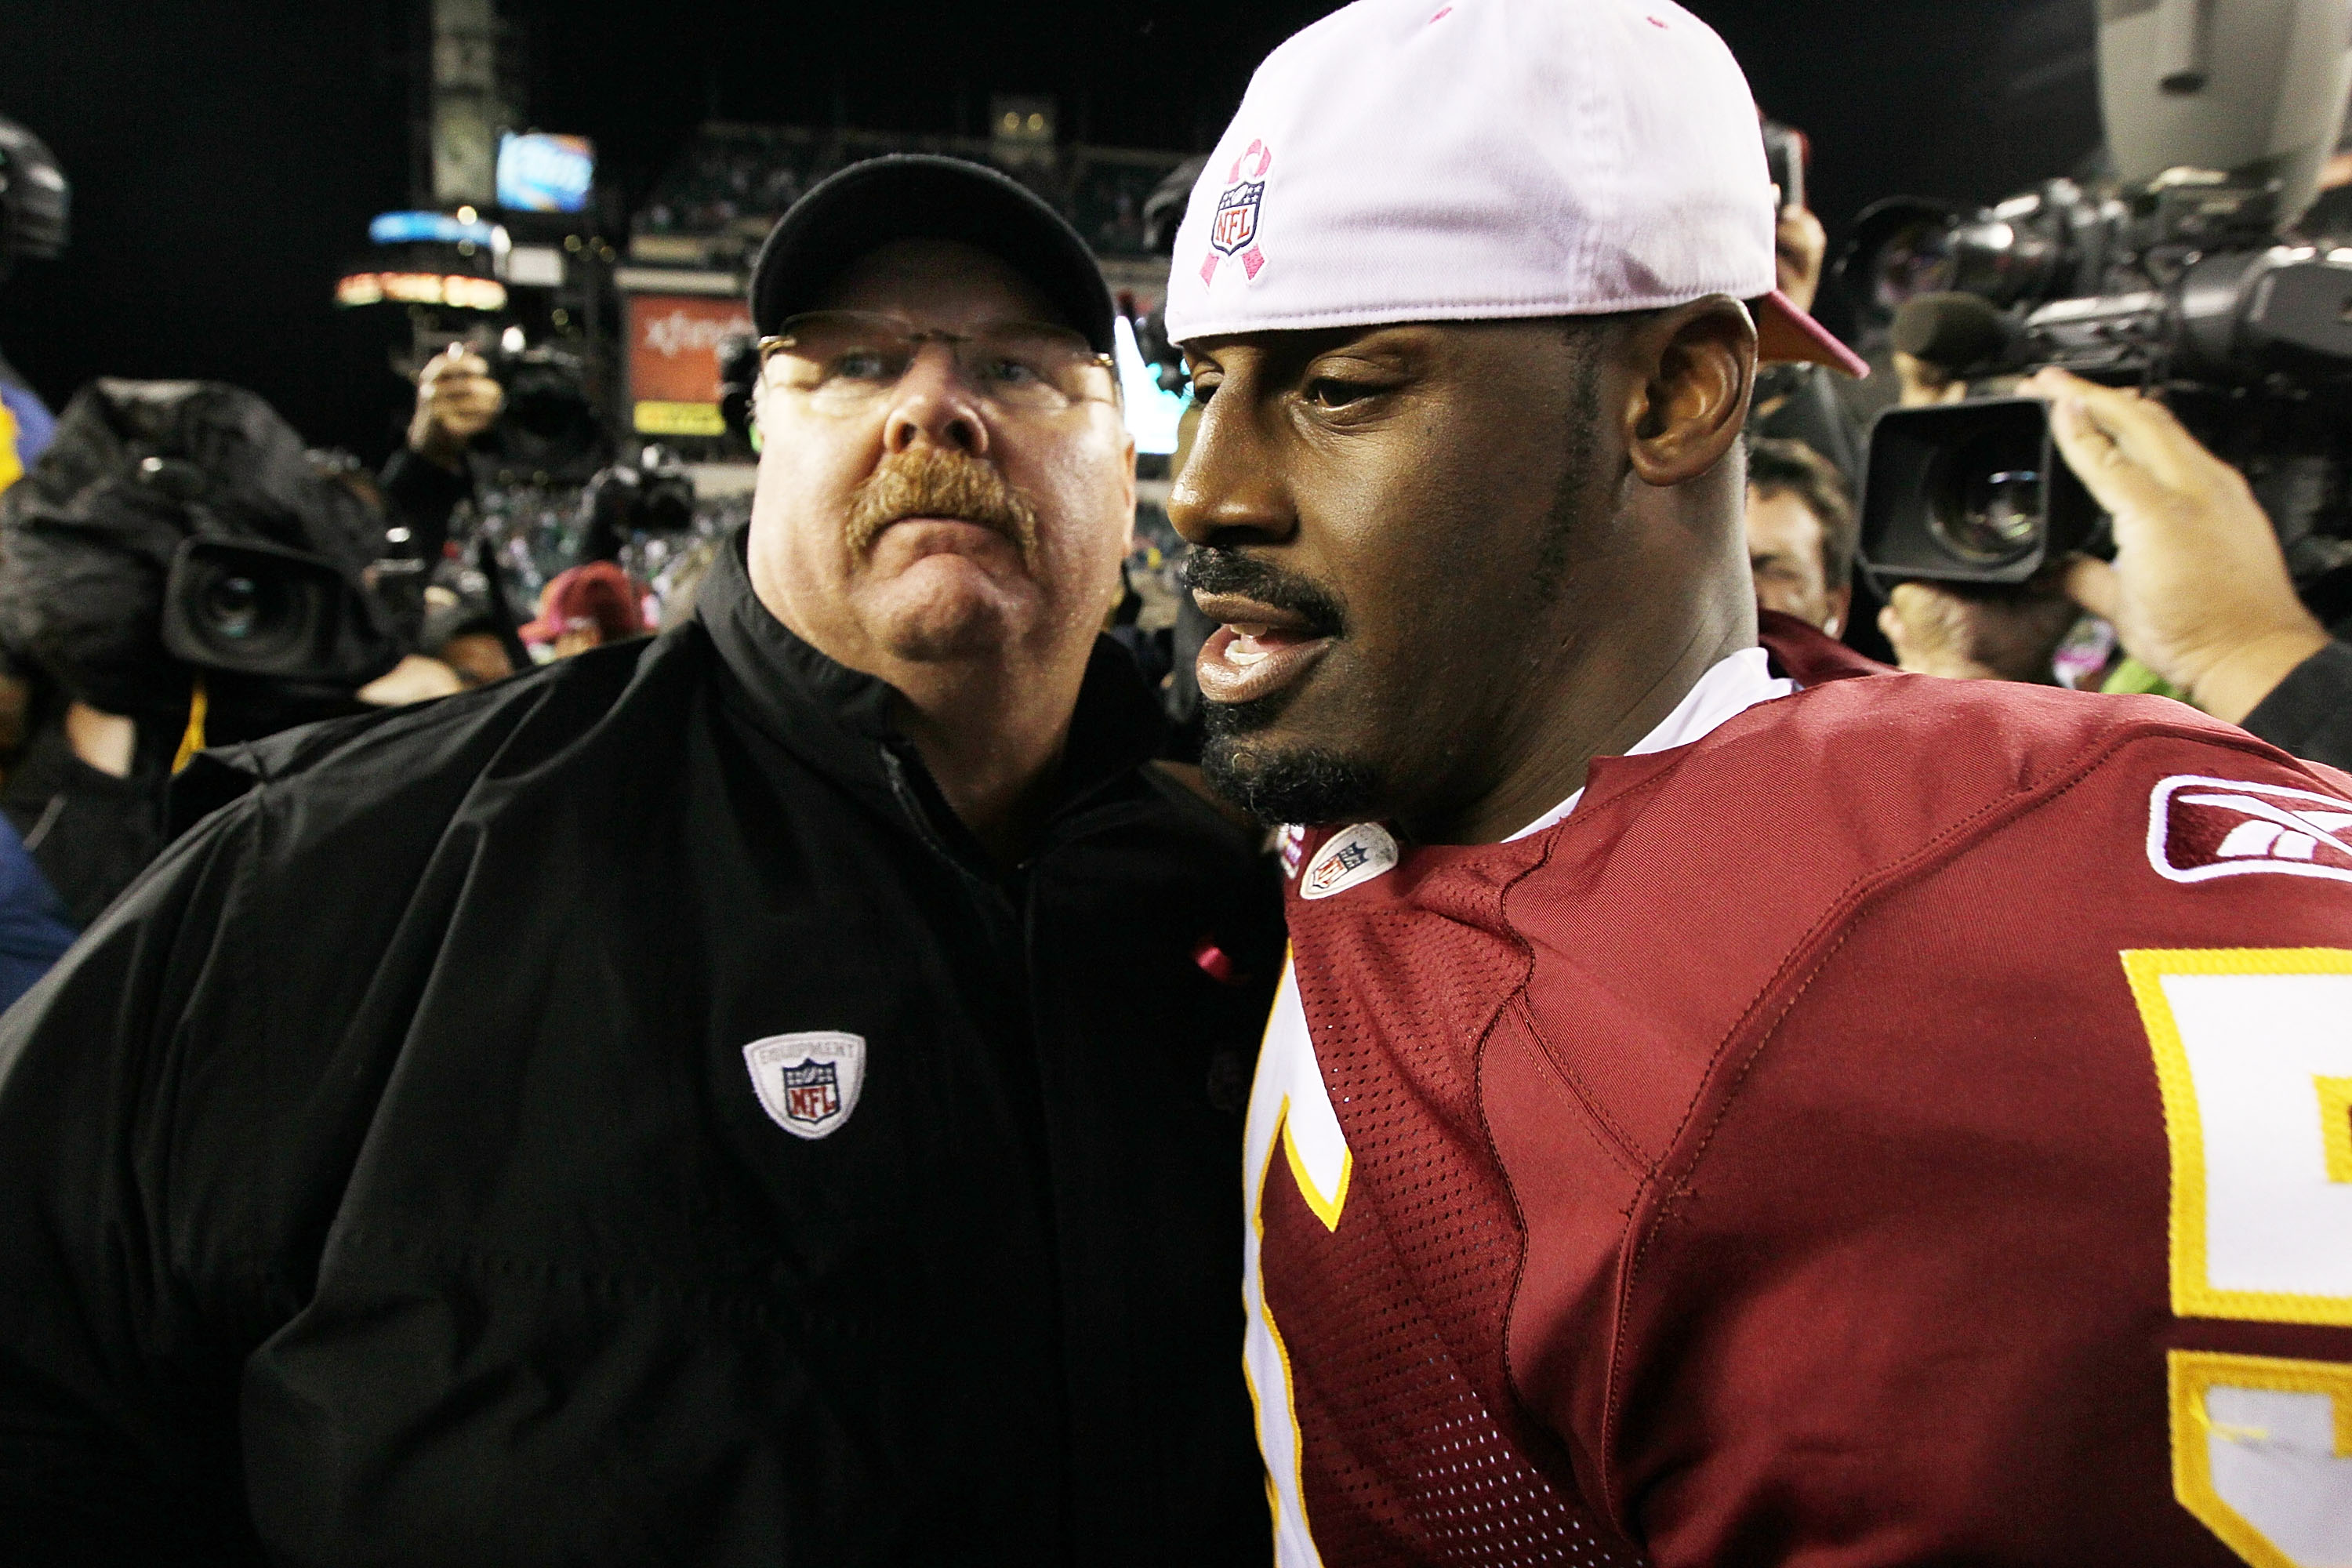 PHILADELPHIA - OCTOBER 03:  Donovan McNabb #5 of the Washington Redskins meets with head coach Andy Reid of the Philadelphia Eagles after their game on October 3, 2010 at Lincoln Financial Field in Philadelphia, Pennsylvania. The Redskins defeated the Eag